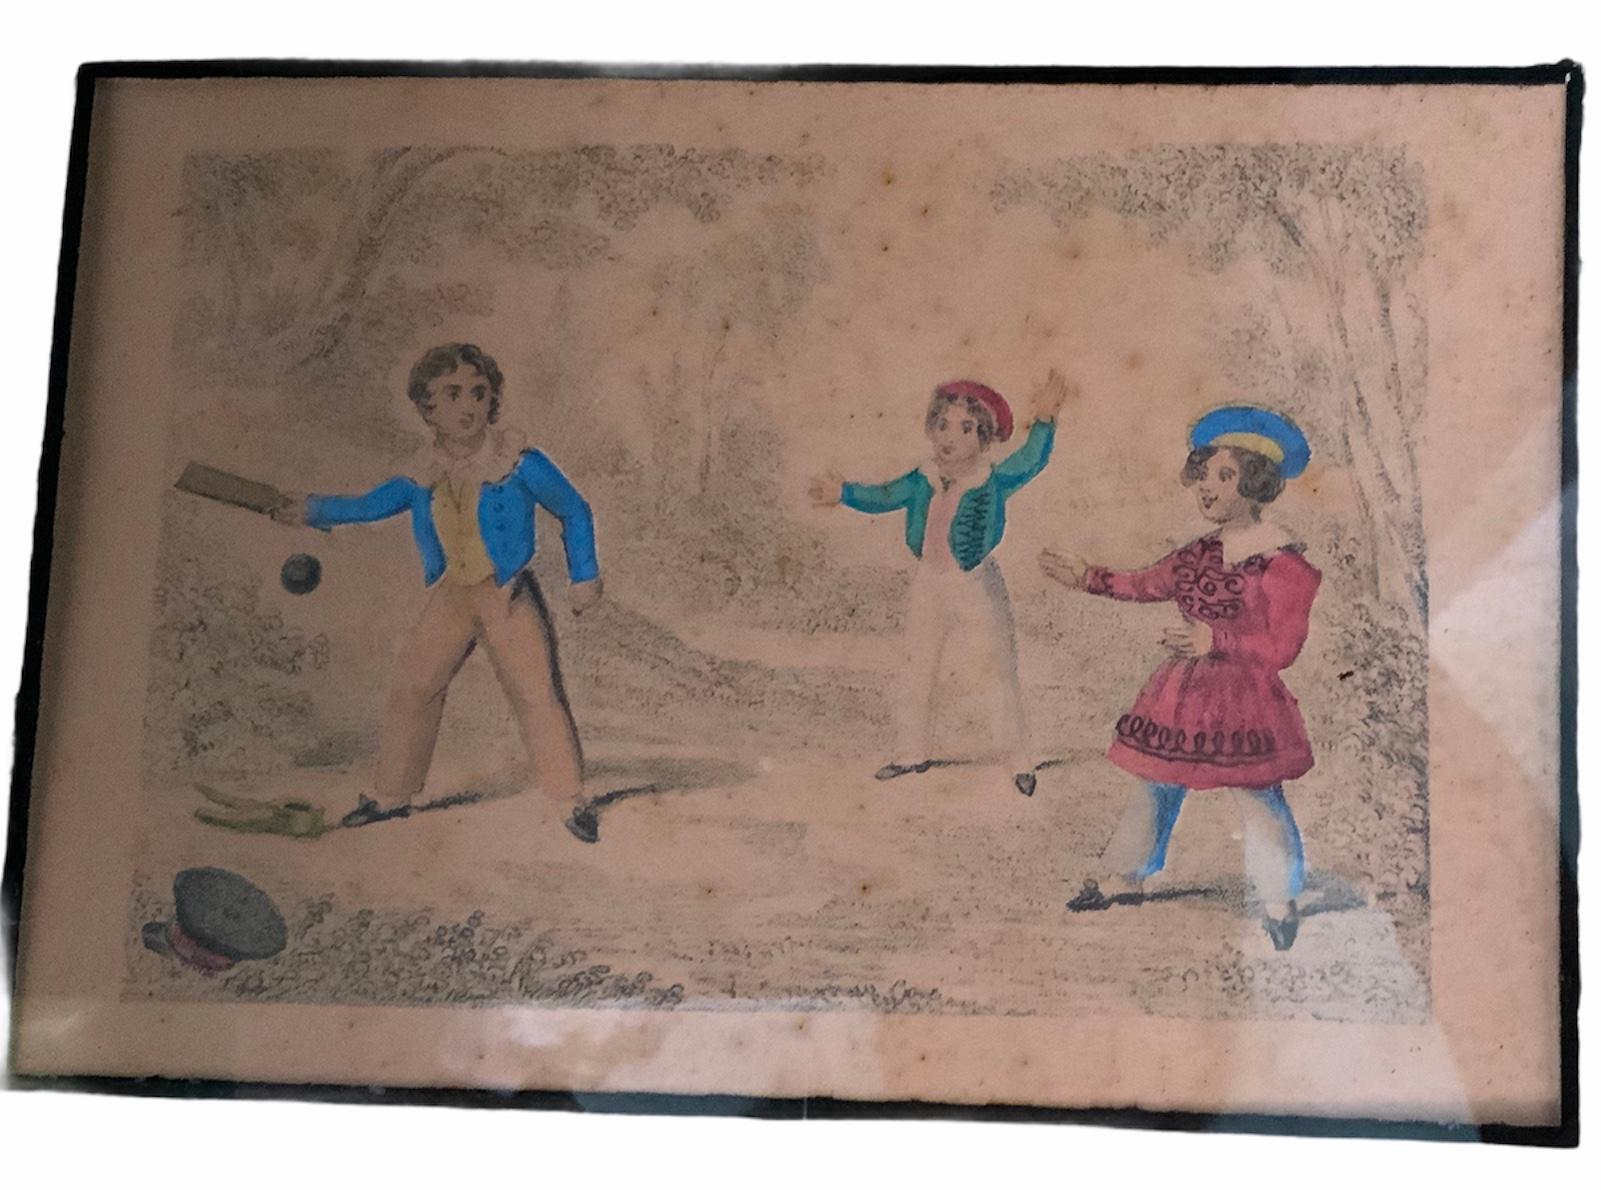 This a miniature watercolor painting of two boys with different shades of blue jackets and a girl with a red dress & blue navy hat playing a Cricket game in a landscape with some trees. Also, the younger boy has a red navy hat. The other boy’s black